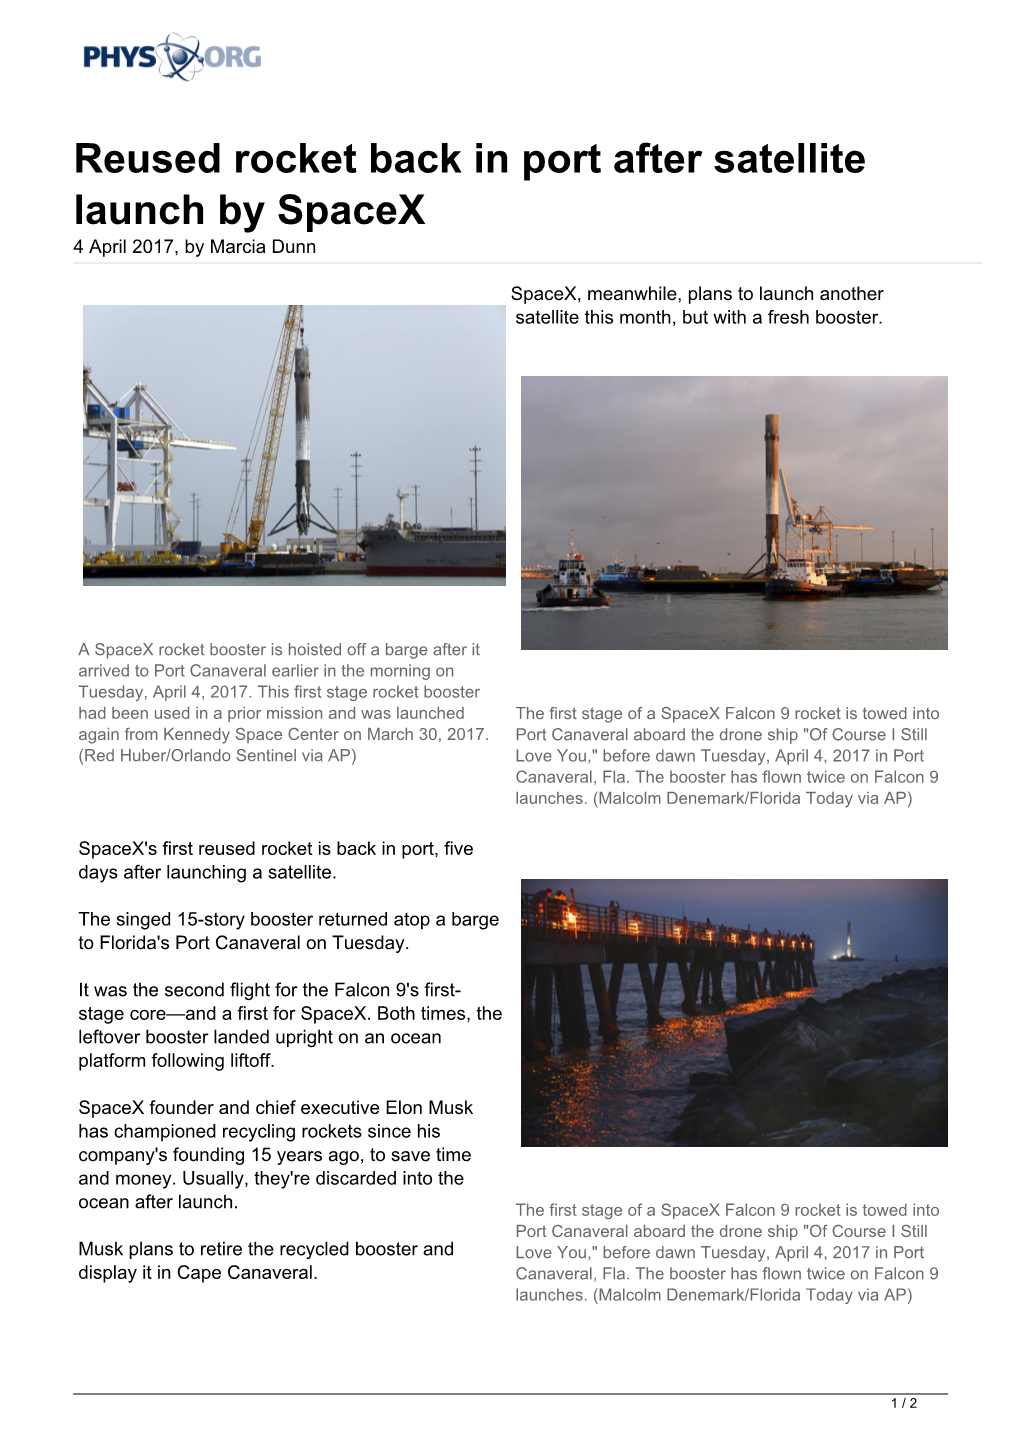 Reused Rocket Back in Port After Satellite Launch by Spacex 4 April 2017, by Marcia Dunn